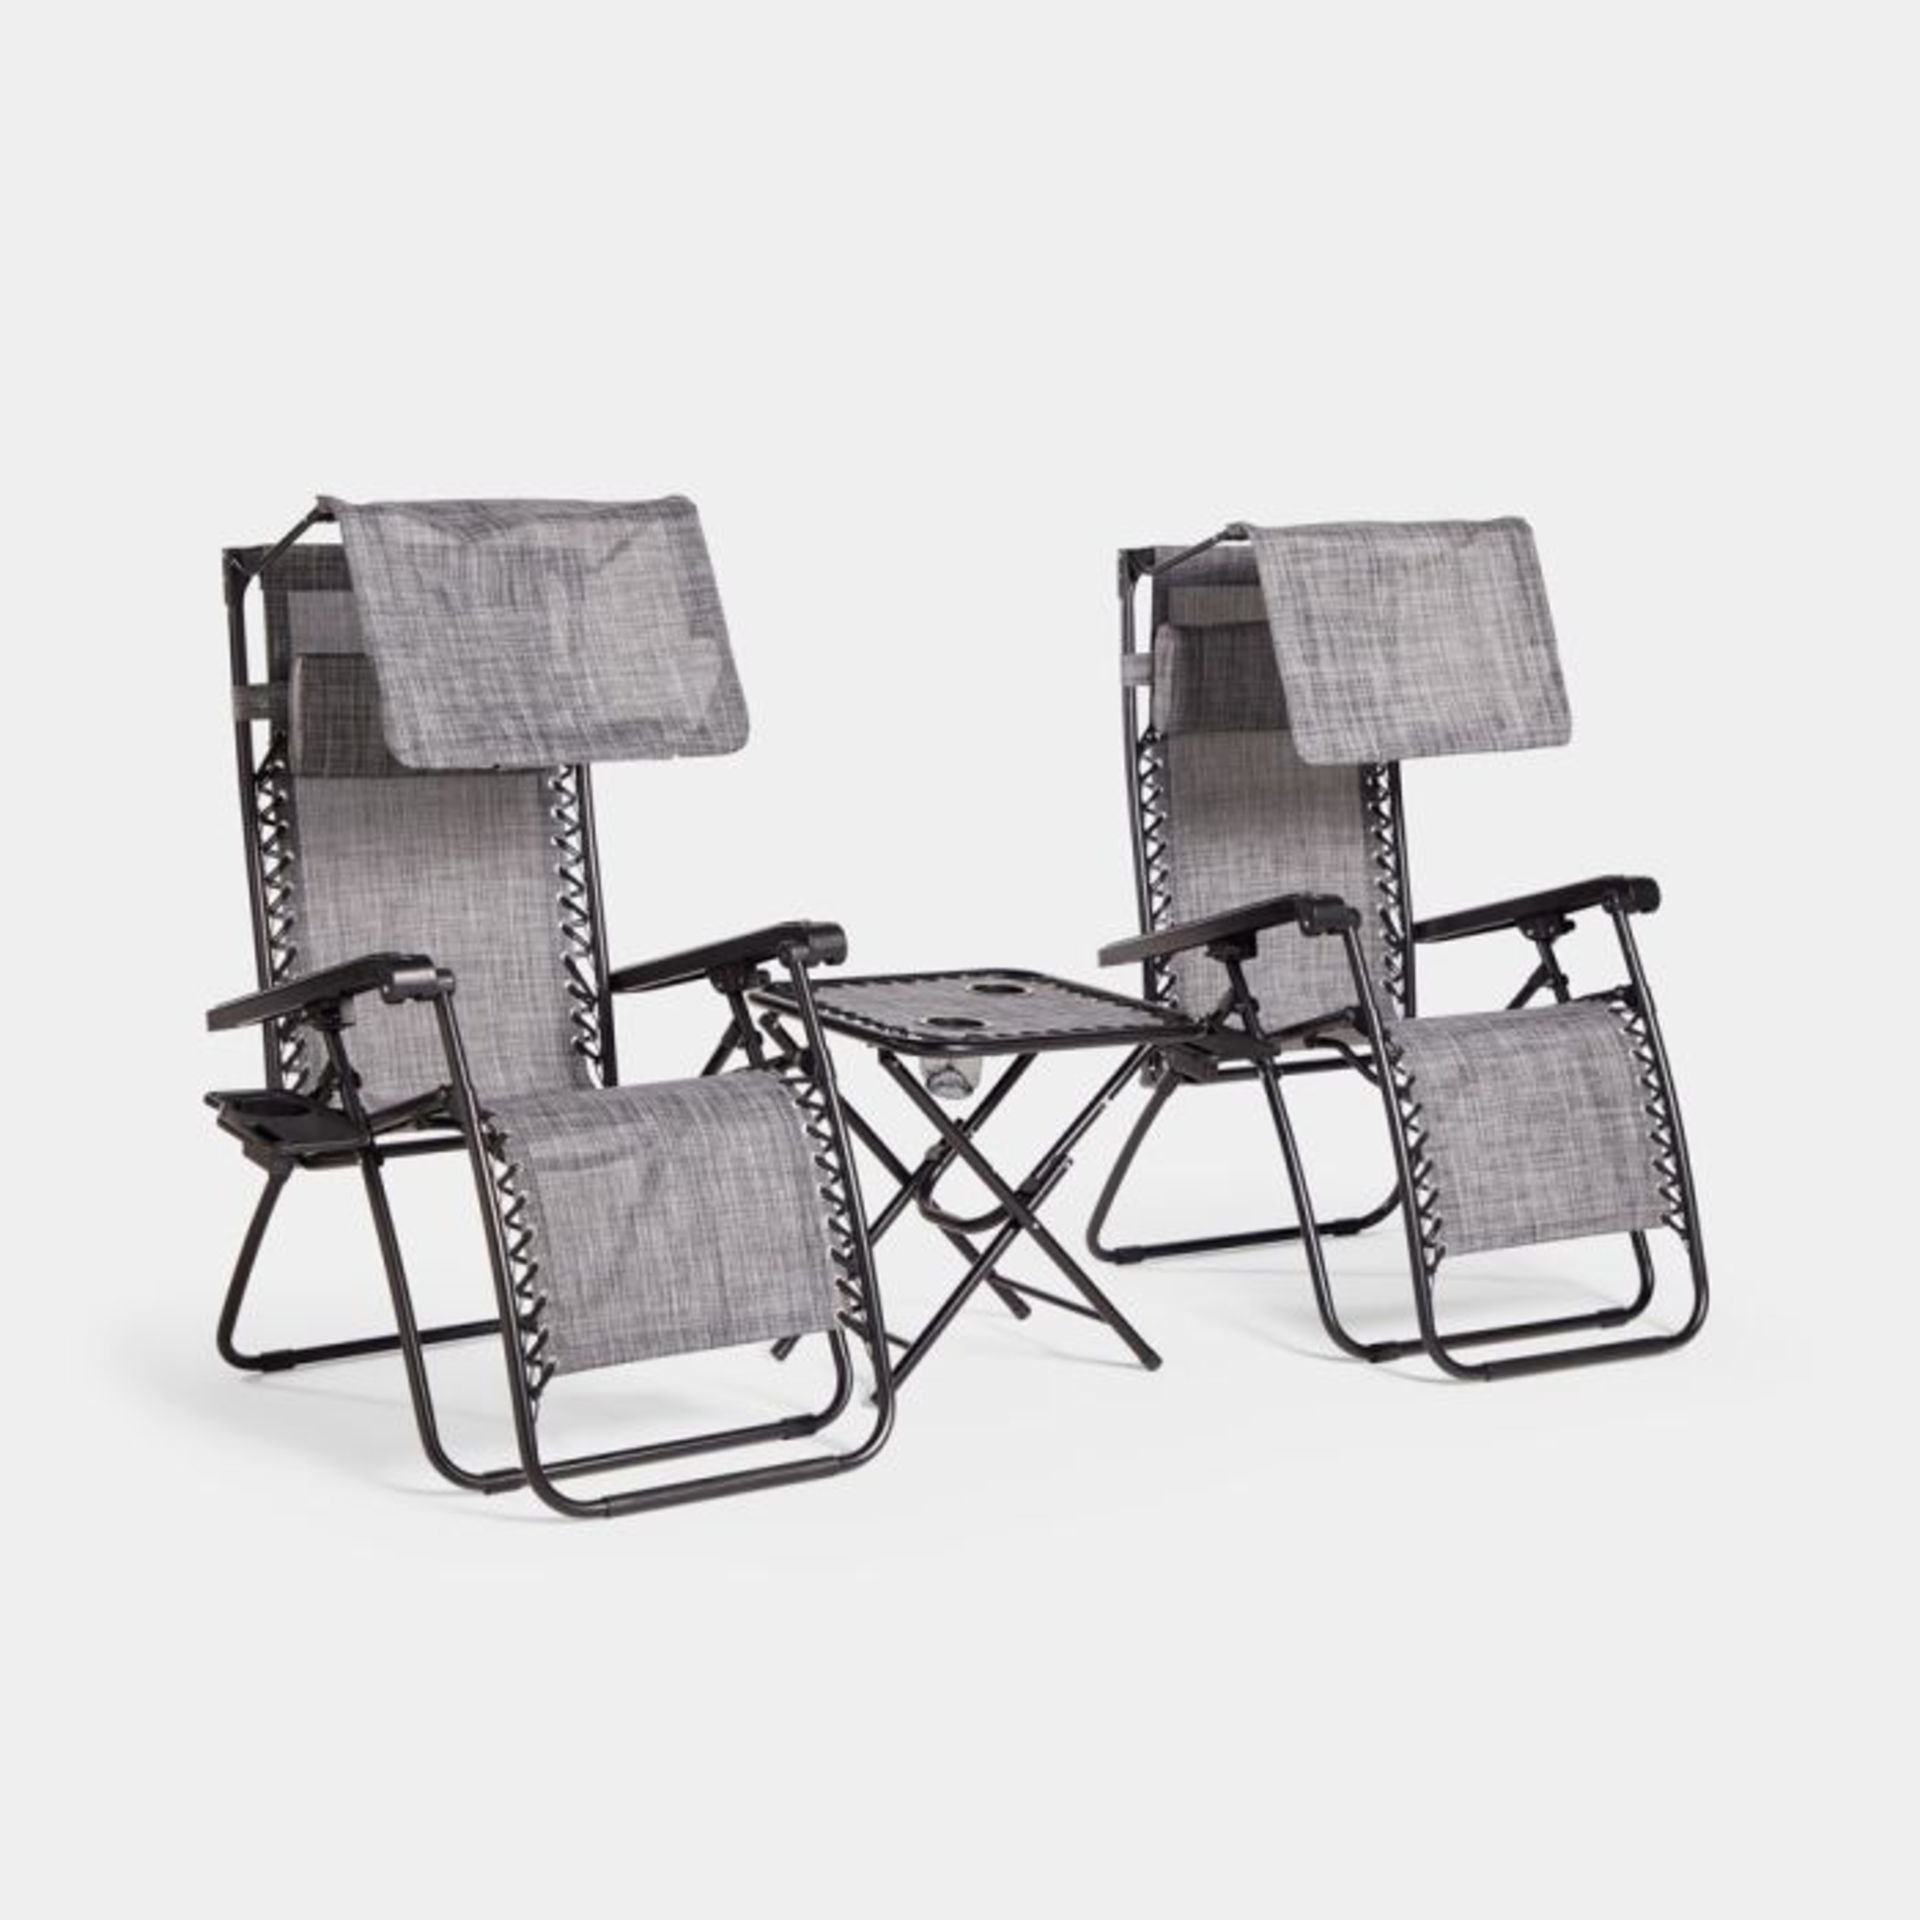 Zero Gravity Table & Chair Set with Canopy. - ER34. Complete with two reclining lounger chairs,